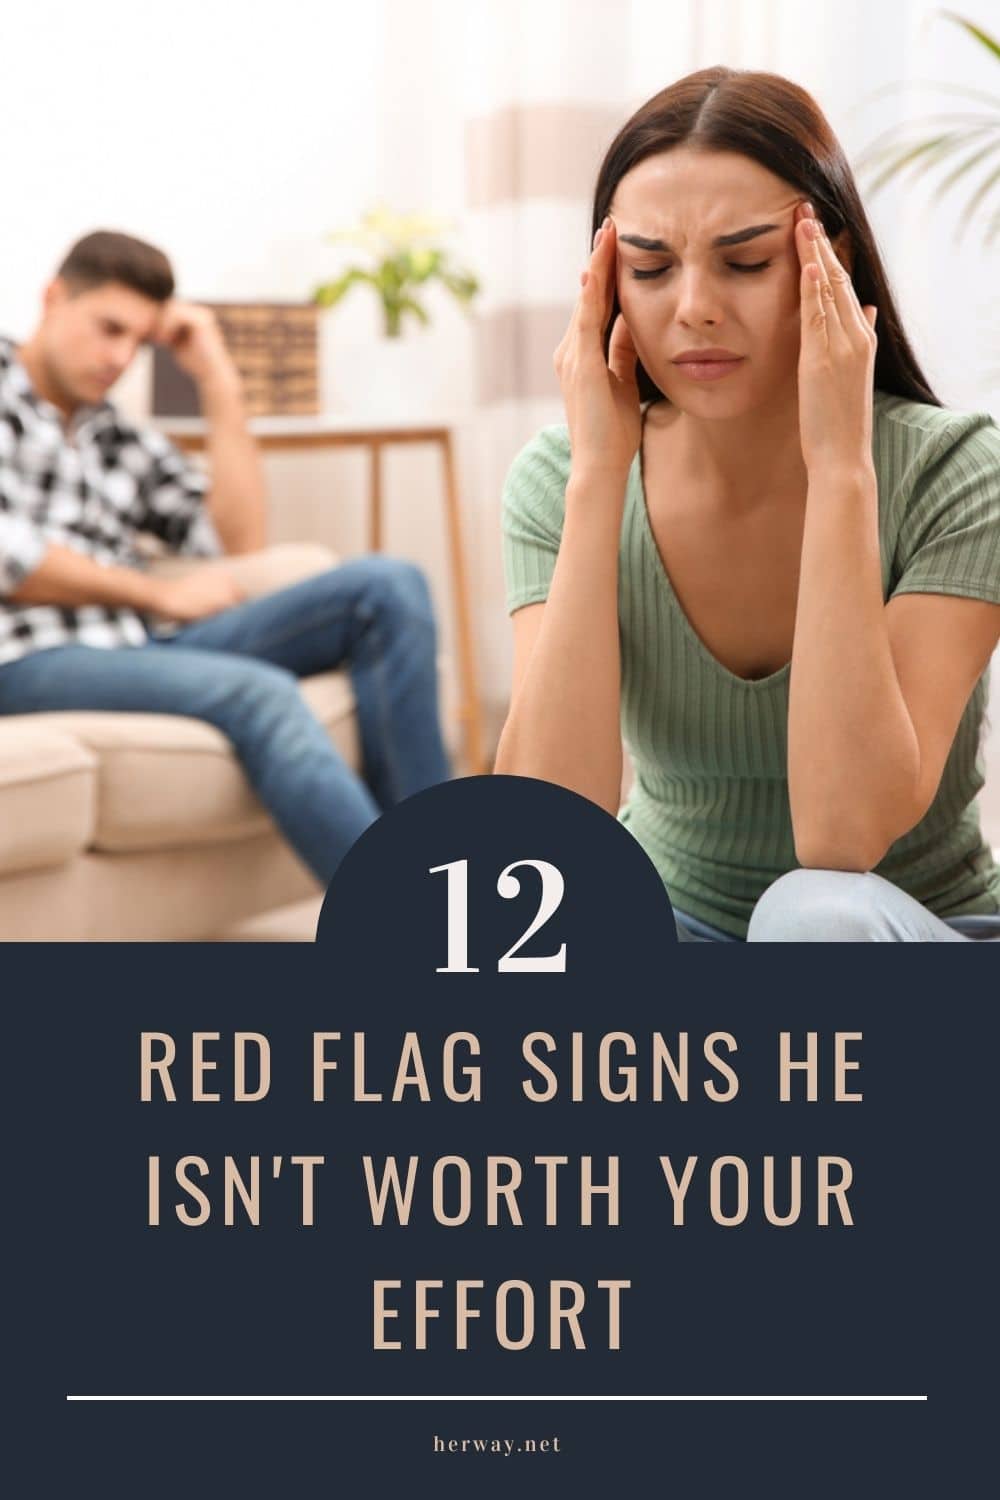 12 Red Flag Signs He Isn't Worth Your Effort